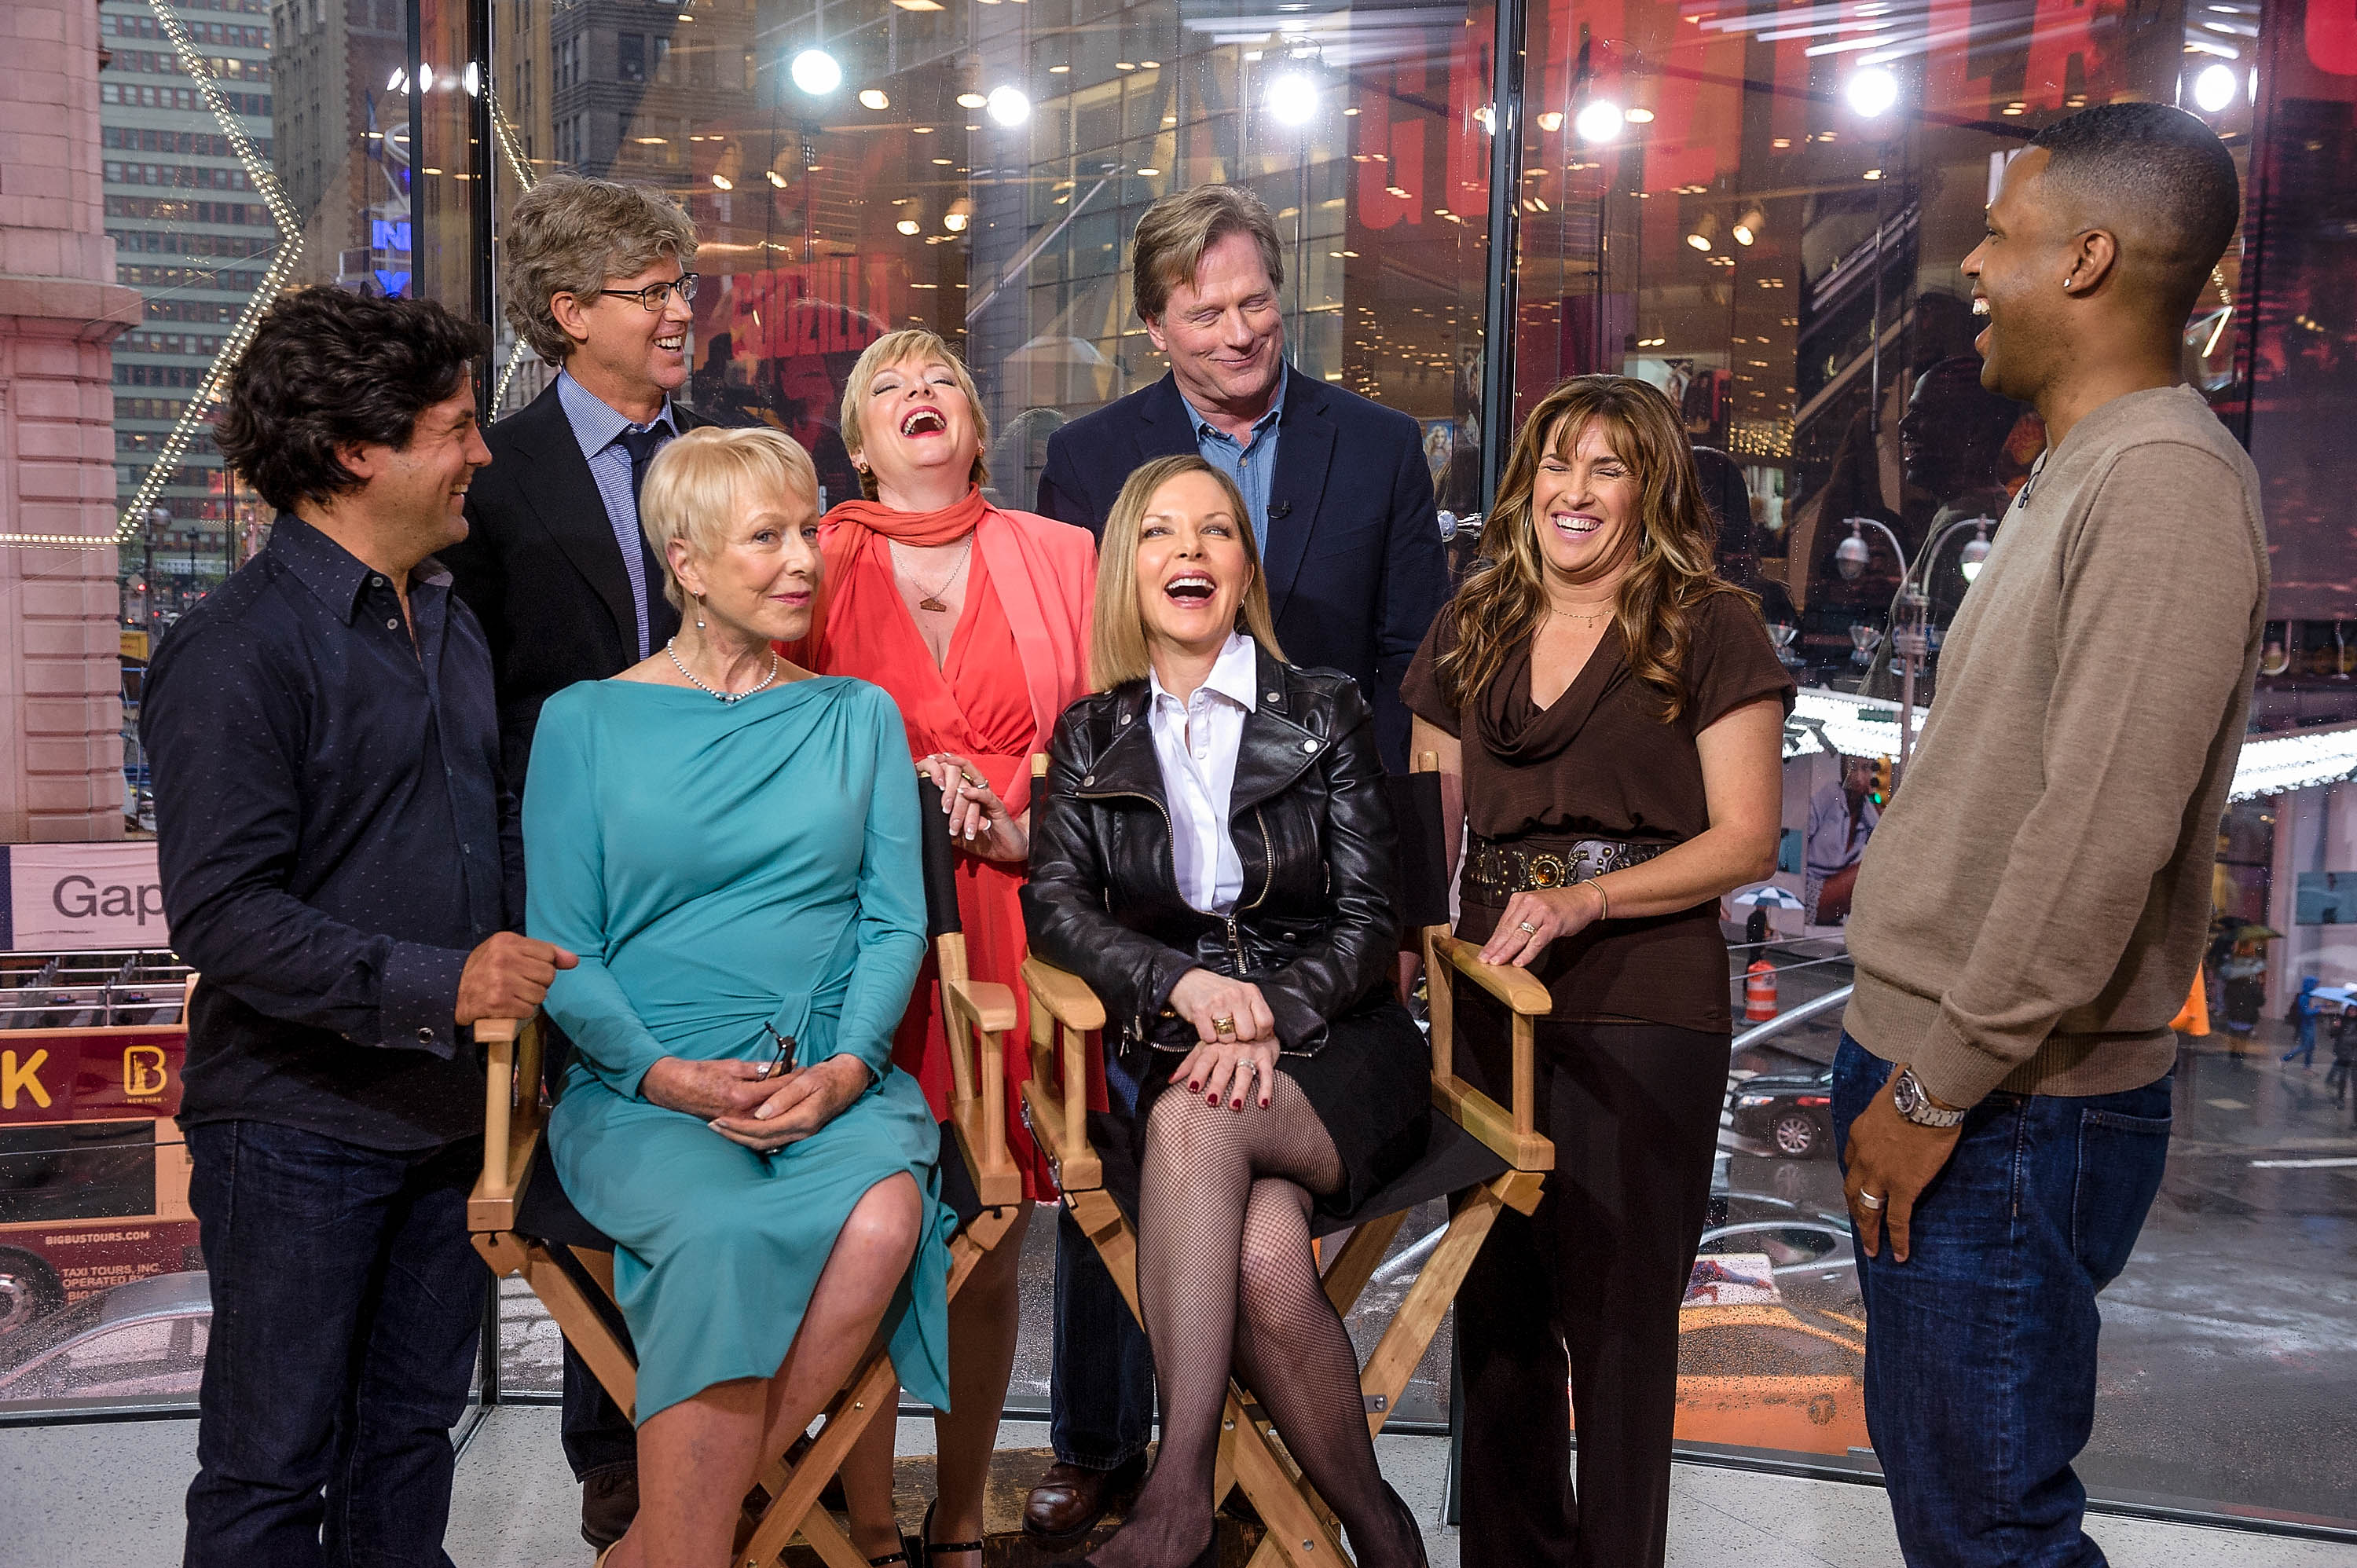 Pictured: (L-R standing) Matthew Labyorteaux, Michael Landon, Jr., Alison Arngrim, Dean Butler, Lindsay Greenbush, (L-R seated) Karen Grassle, and Melissa Sue Anderson of "Little House on the Prairie" interviewed by AJ Calloway (R) during their visit to "Extra" at their New York studios at H&M in Times Square on April 30, 2014 in New York City. / Source: Getty Images